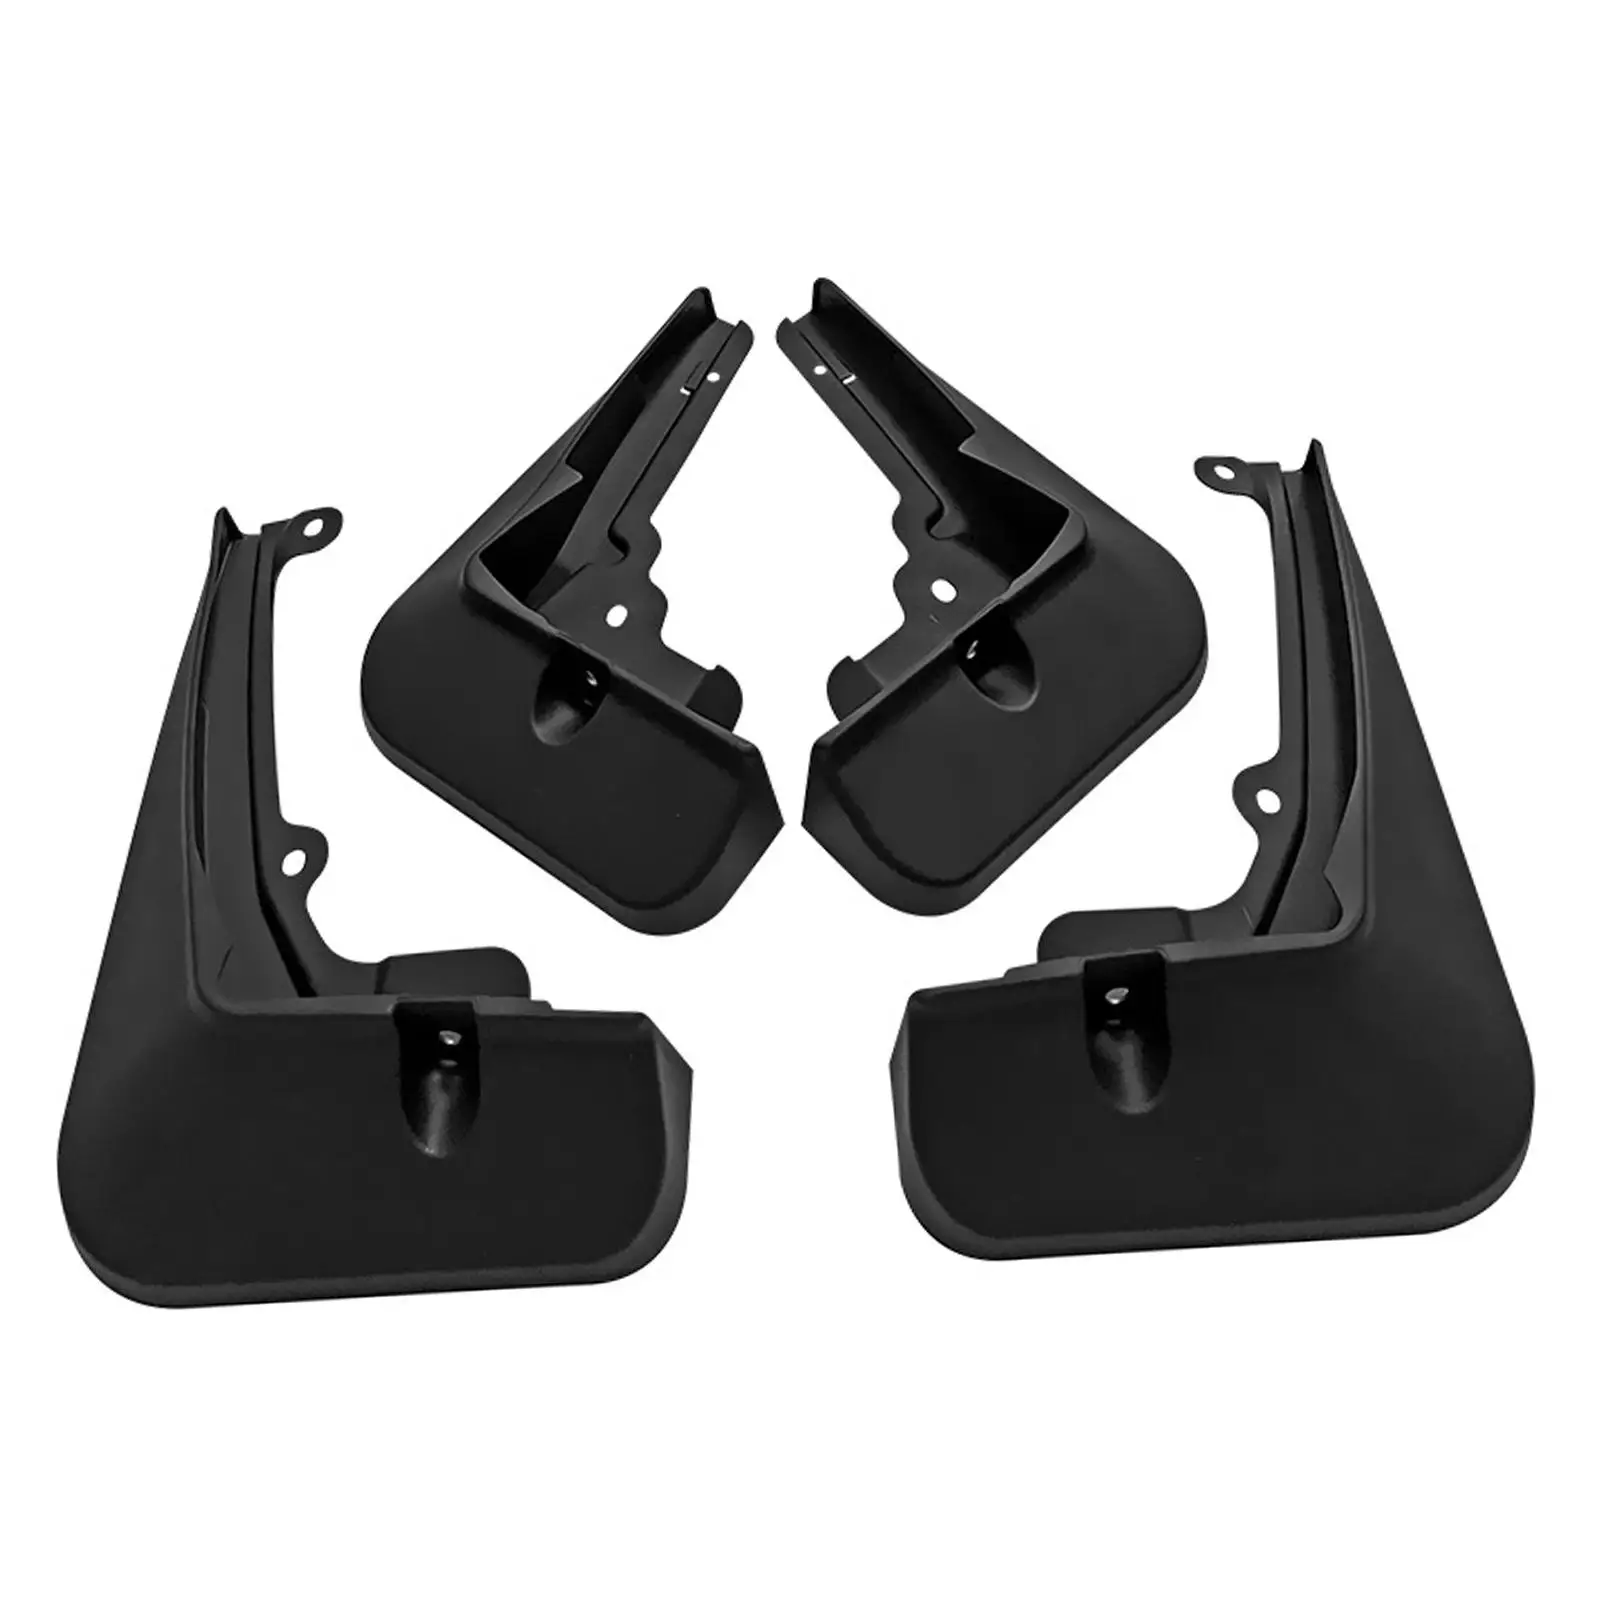 4x Car Mudguard Professional Portable Muds Flaps for Byd Seal 2022